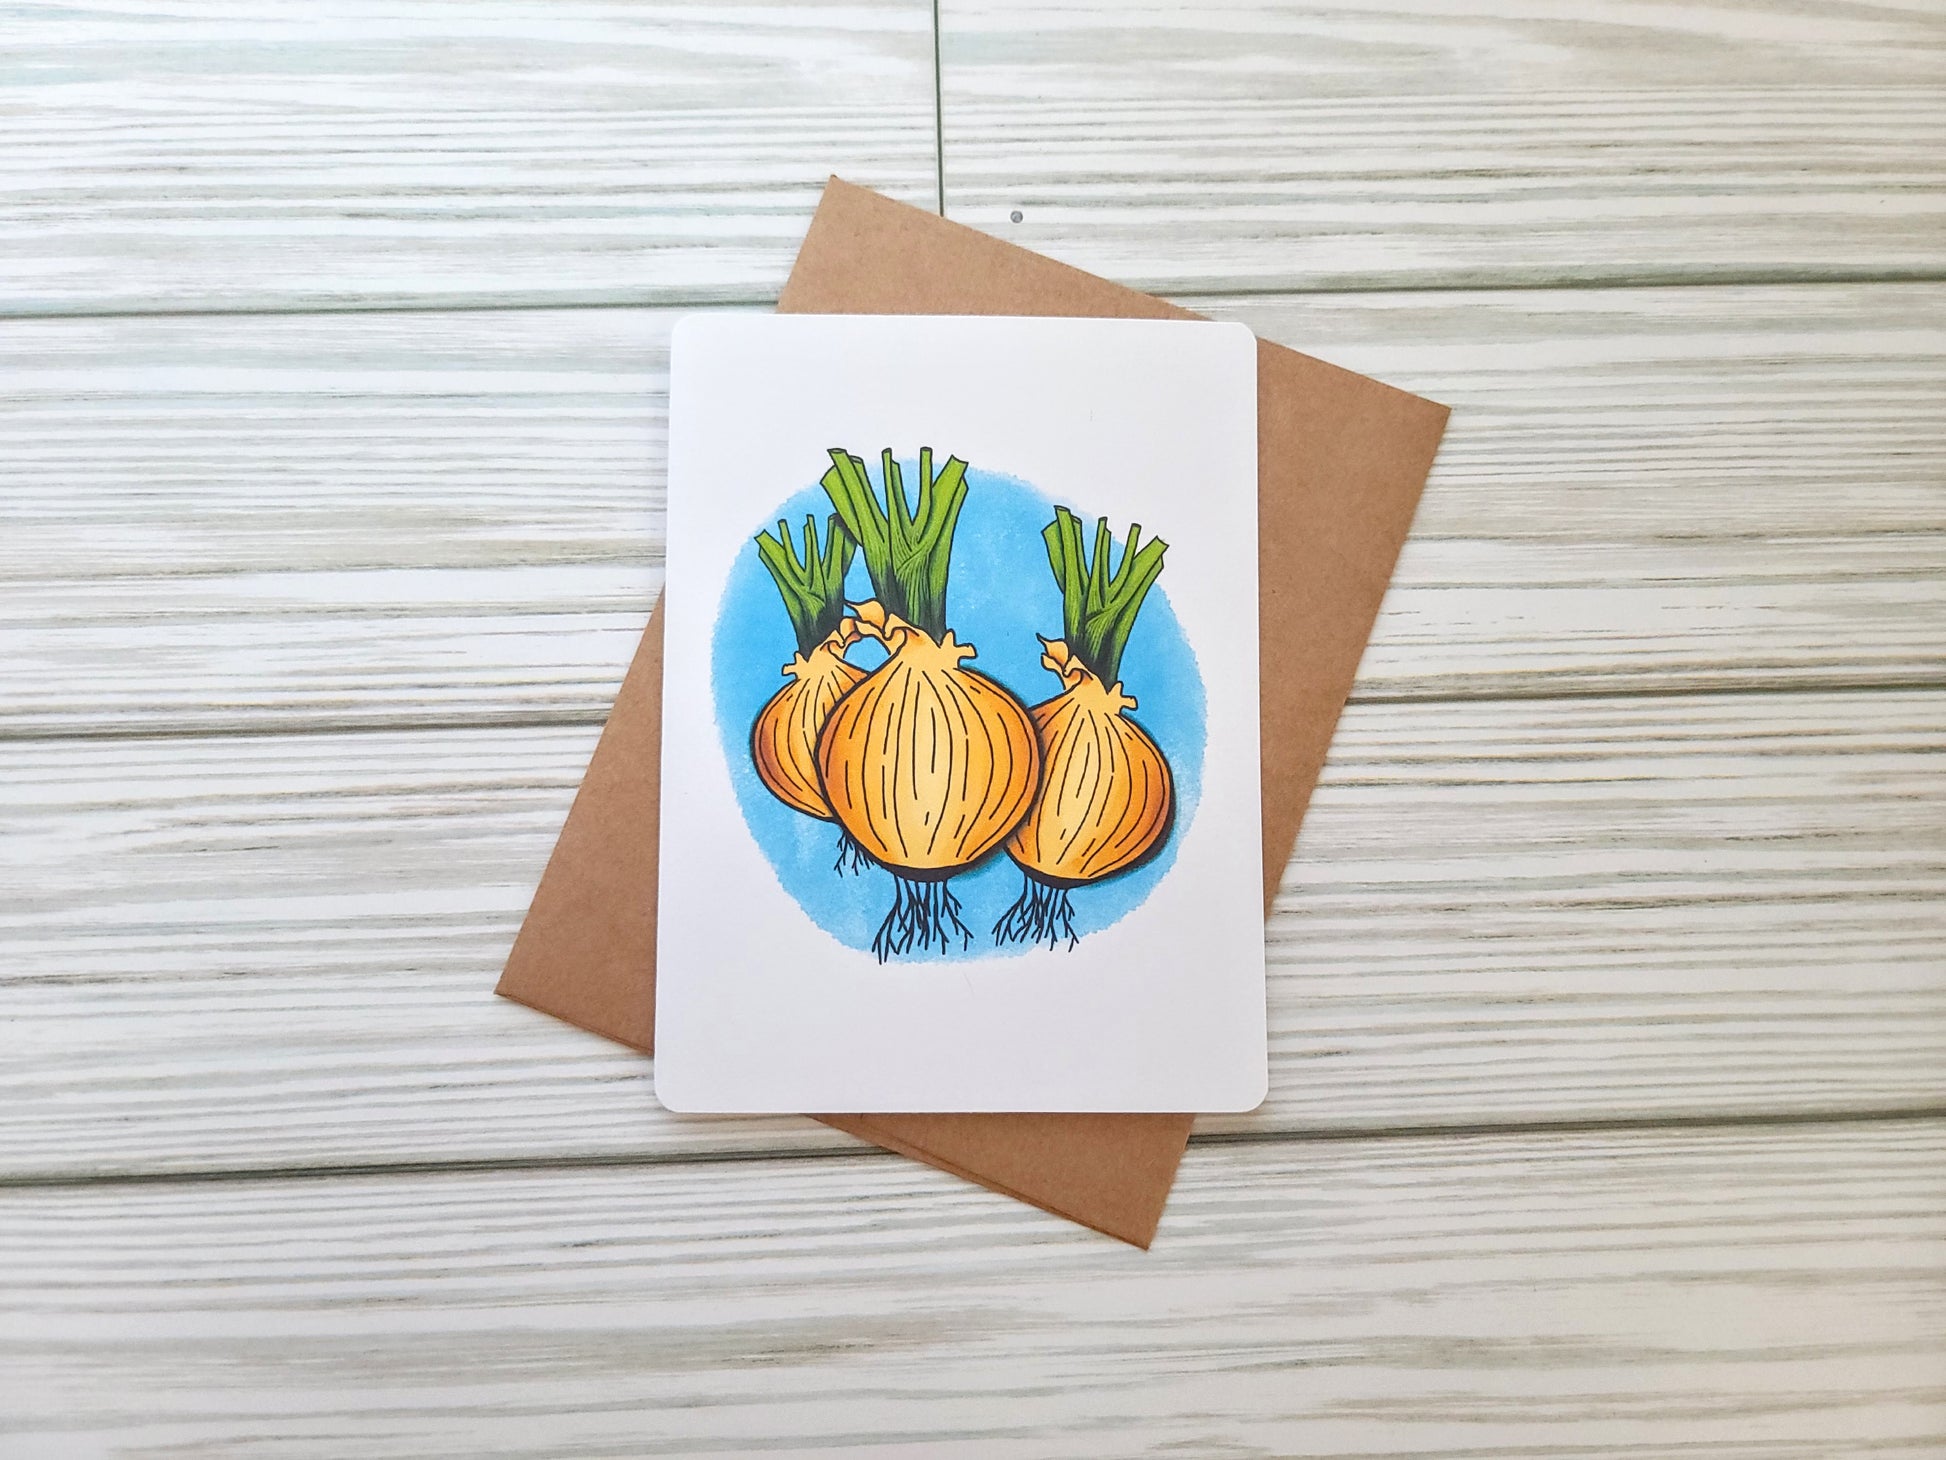 Onion Handmade Greeting Card - Recycled Paper and Kraft Envelope - Landscape Overhead Shot